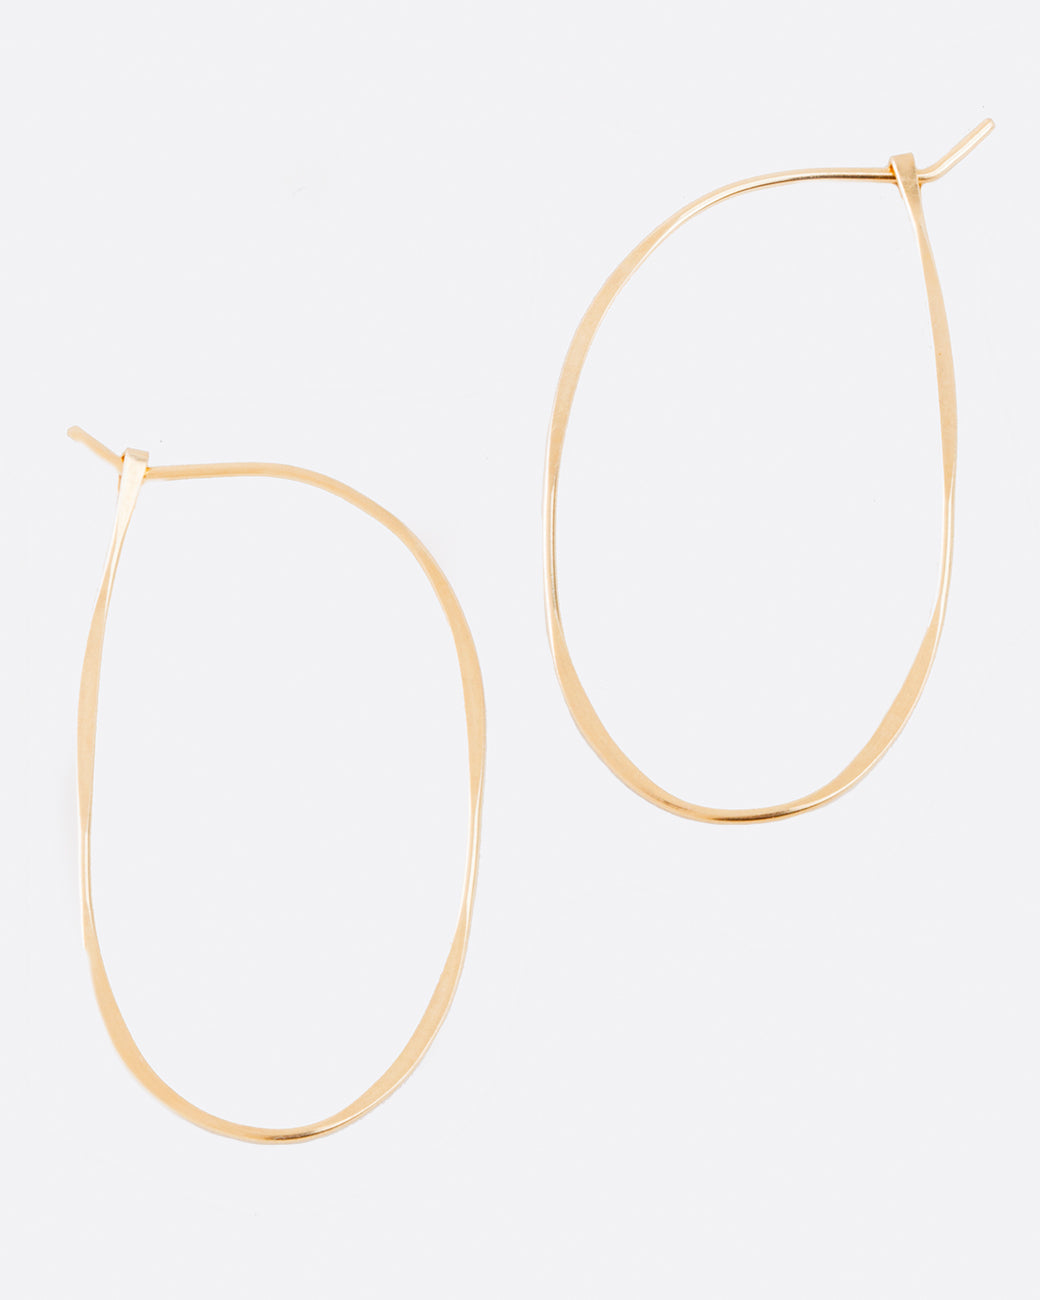 Hammered, off-center, oval hoops that close upon themselves.